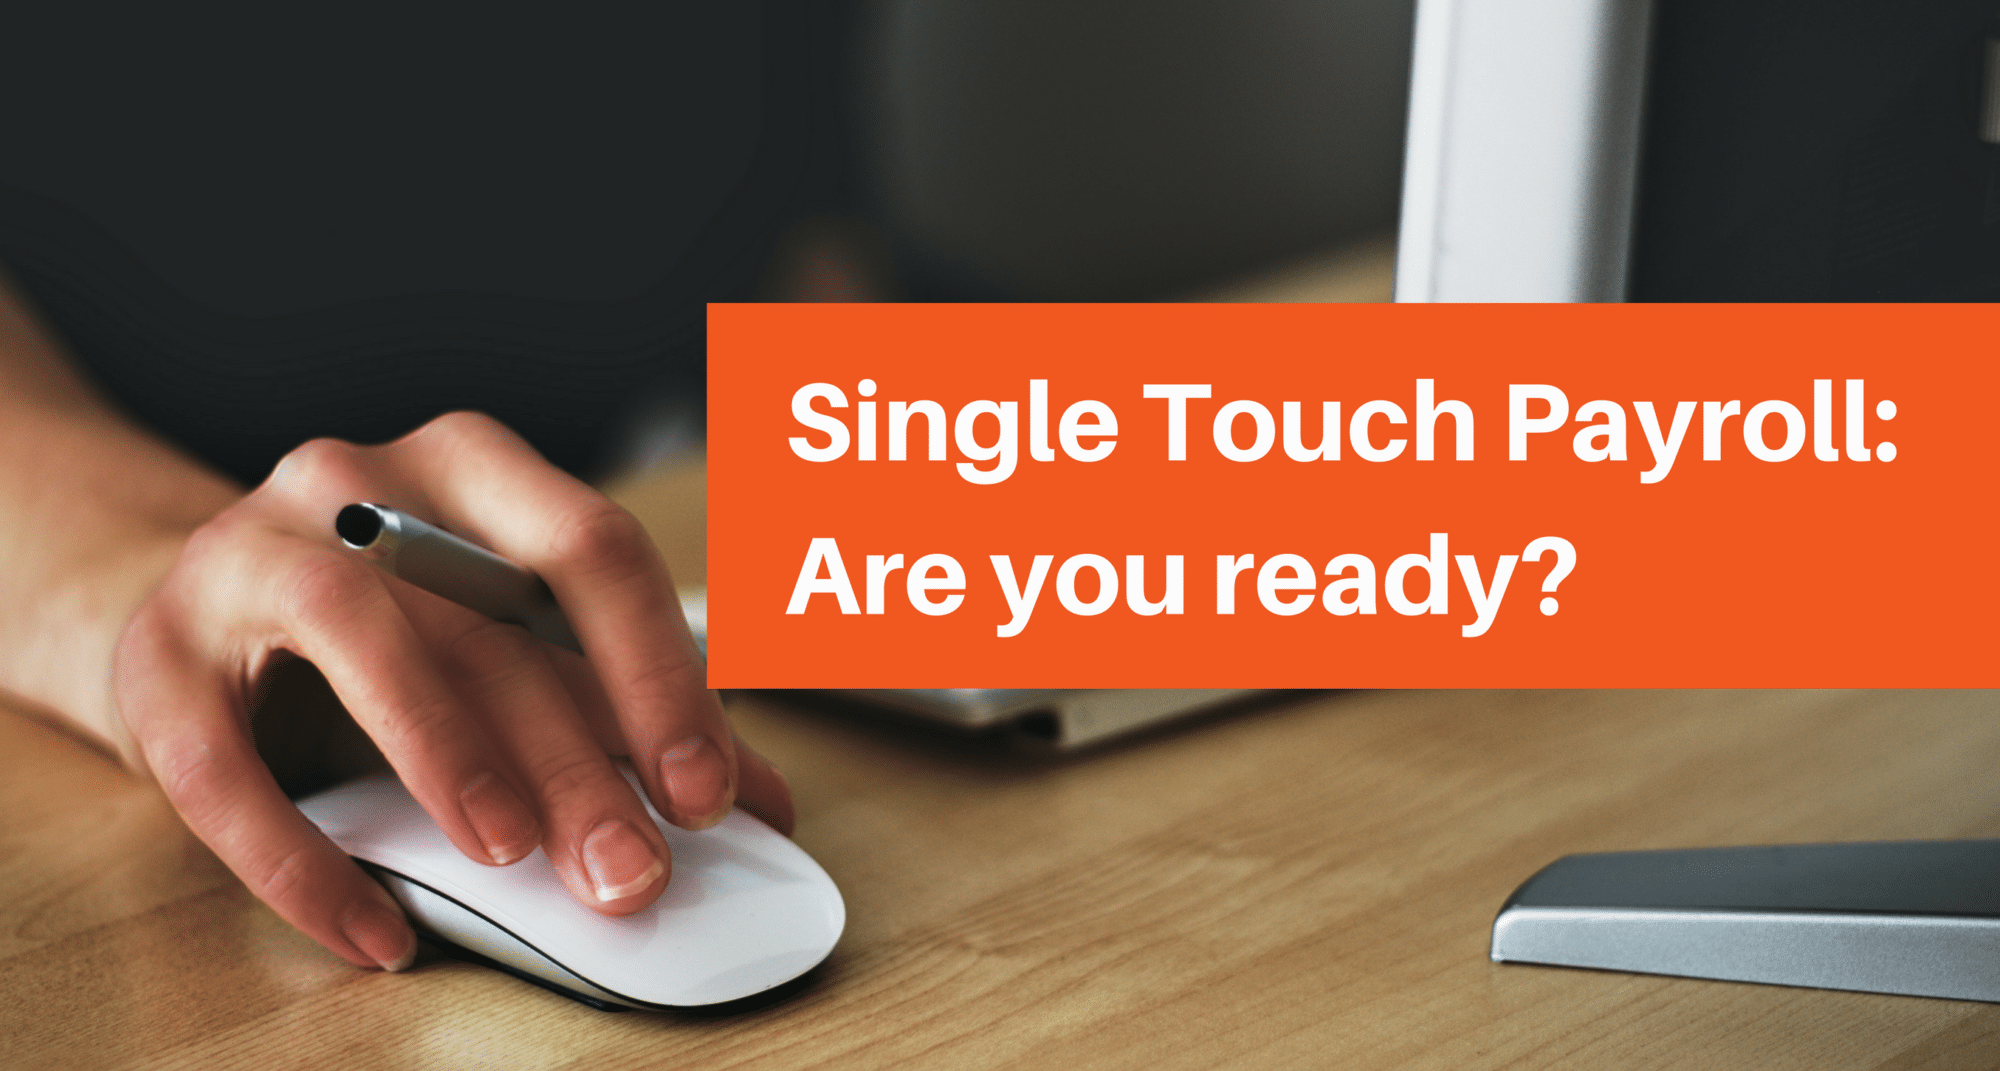 Single Touch Payroll: Are you ready?